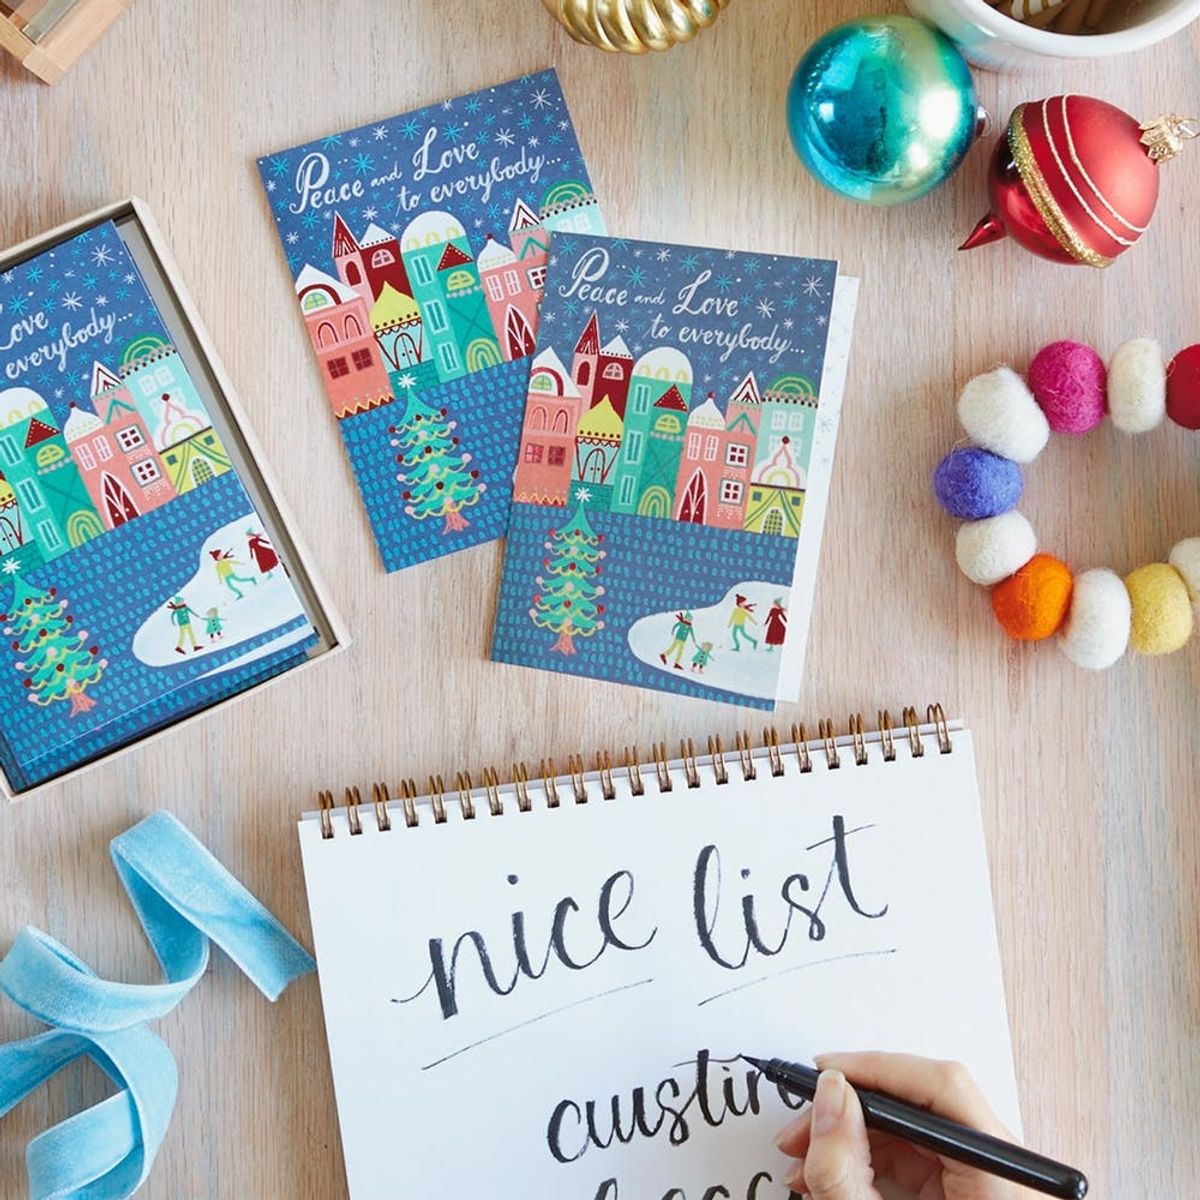 10 Reasons for Why You SHOULDN’T Skip Sending Holiday Cards This Year